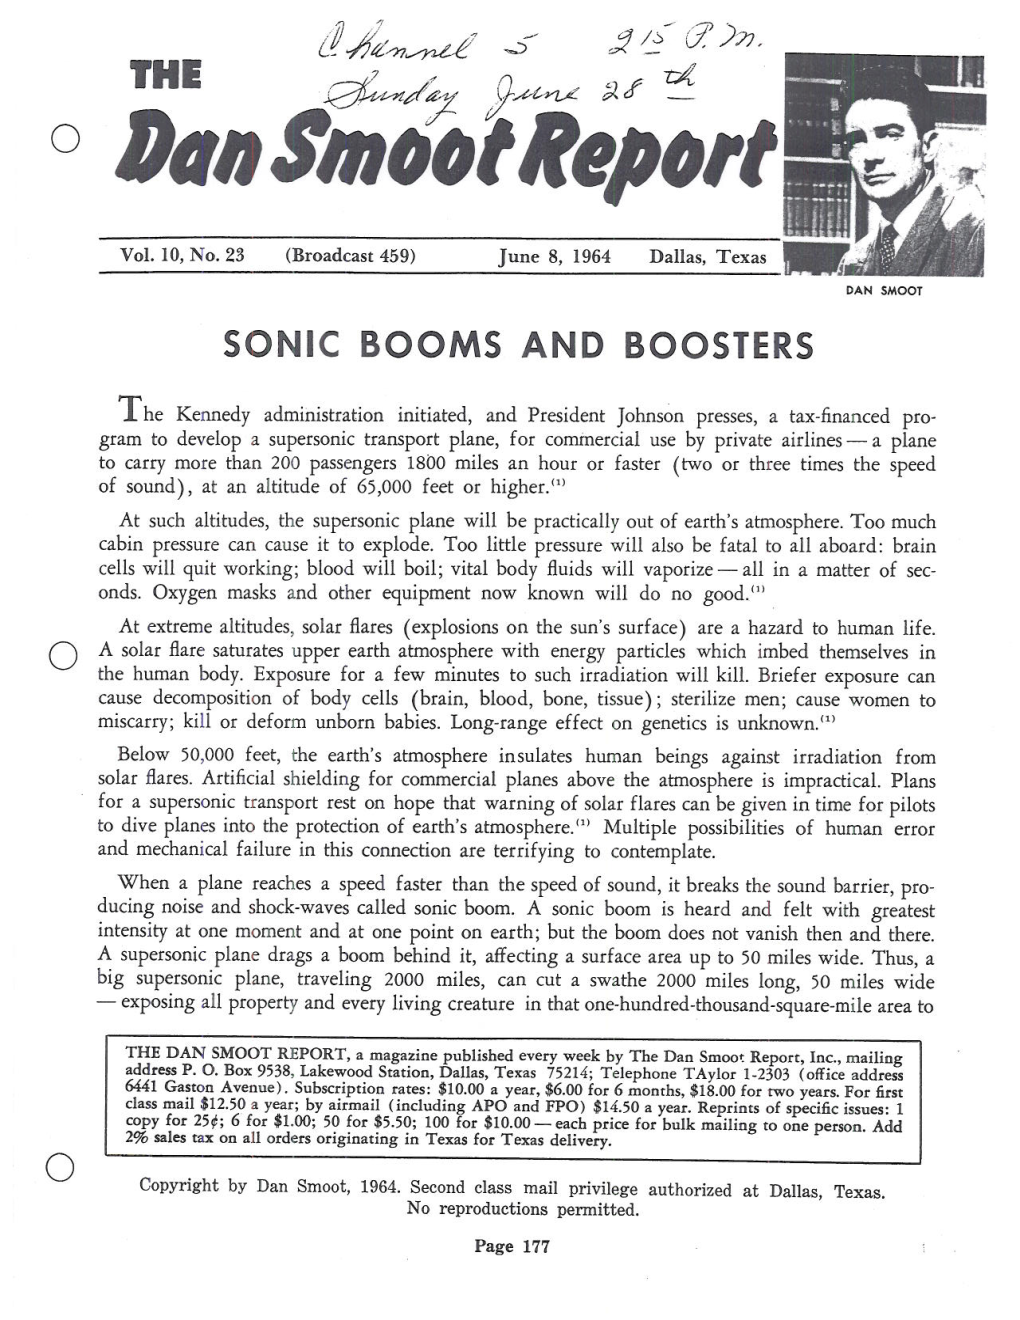 Sonic Booms and Boosters